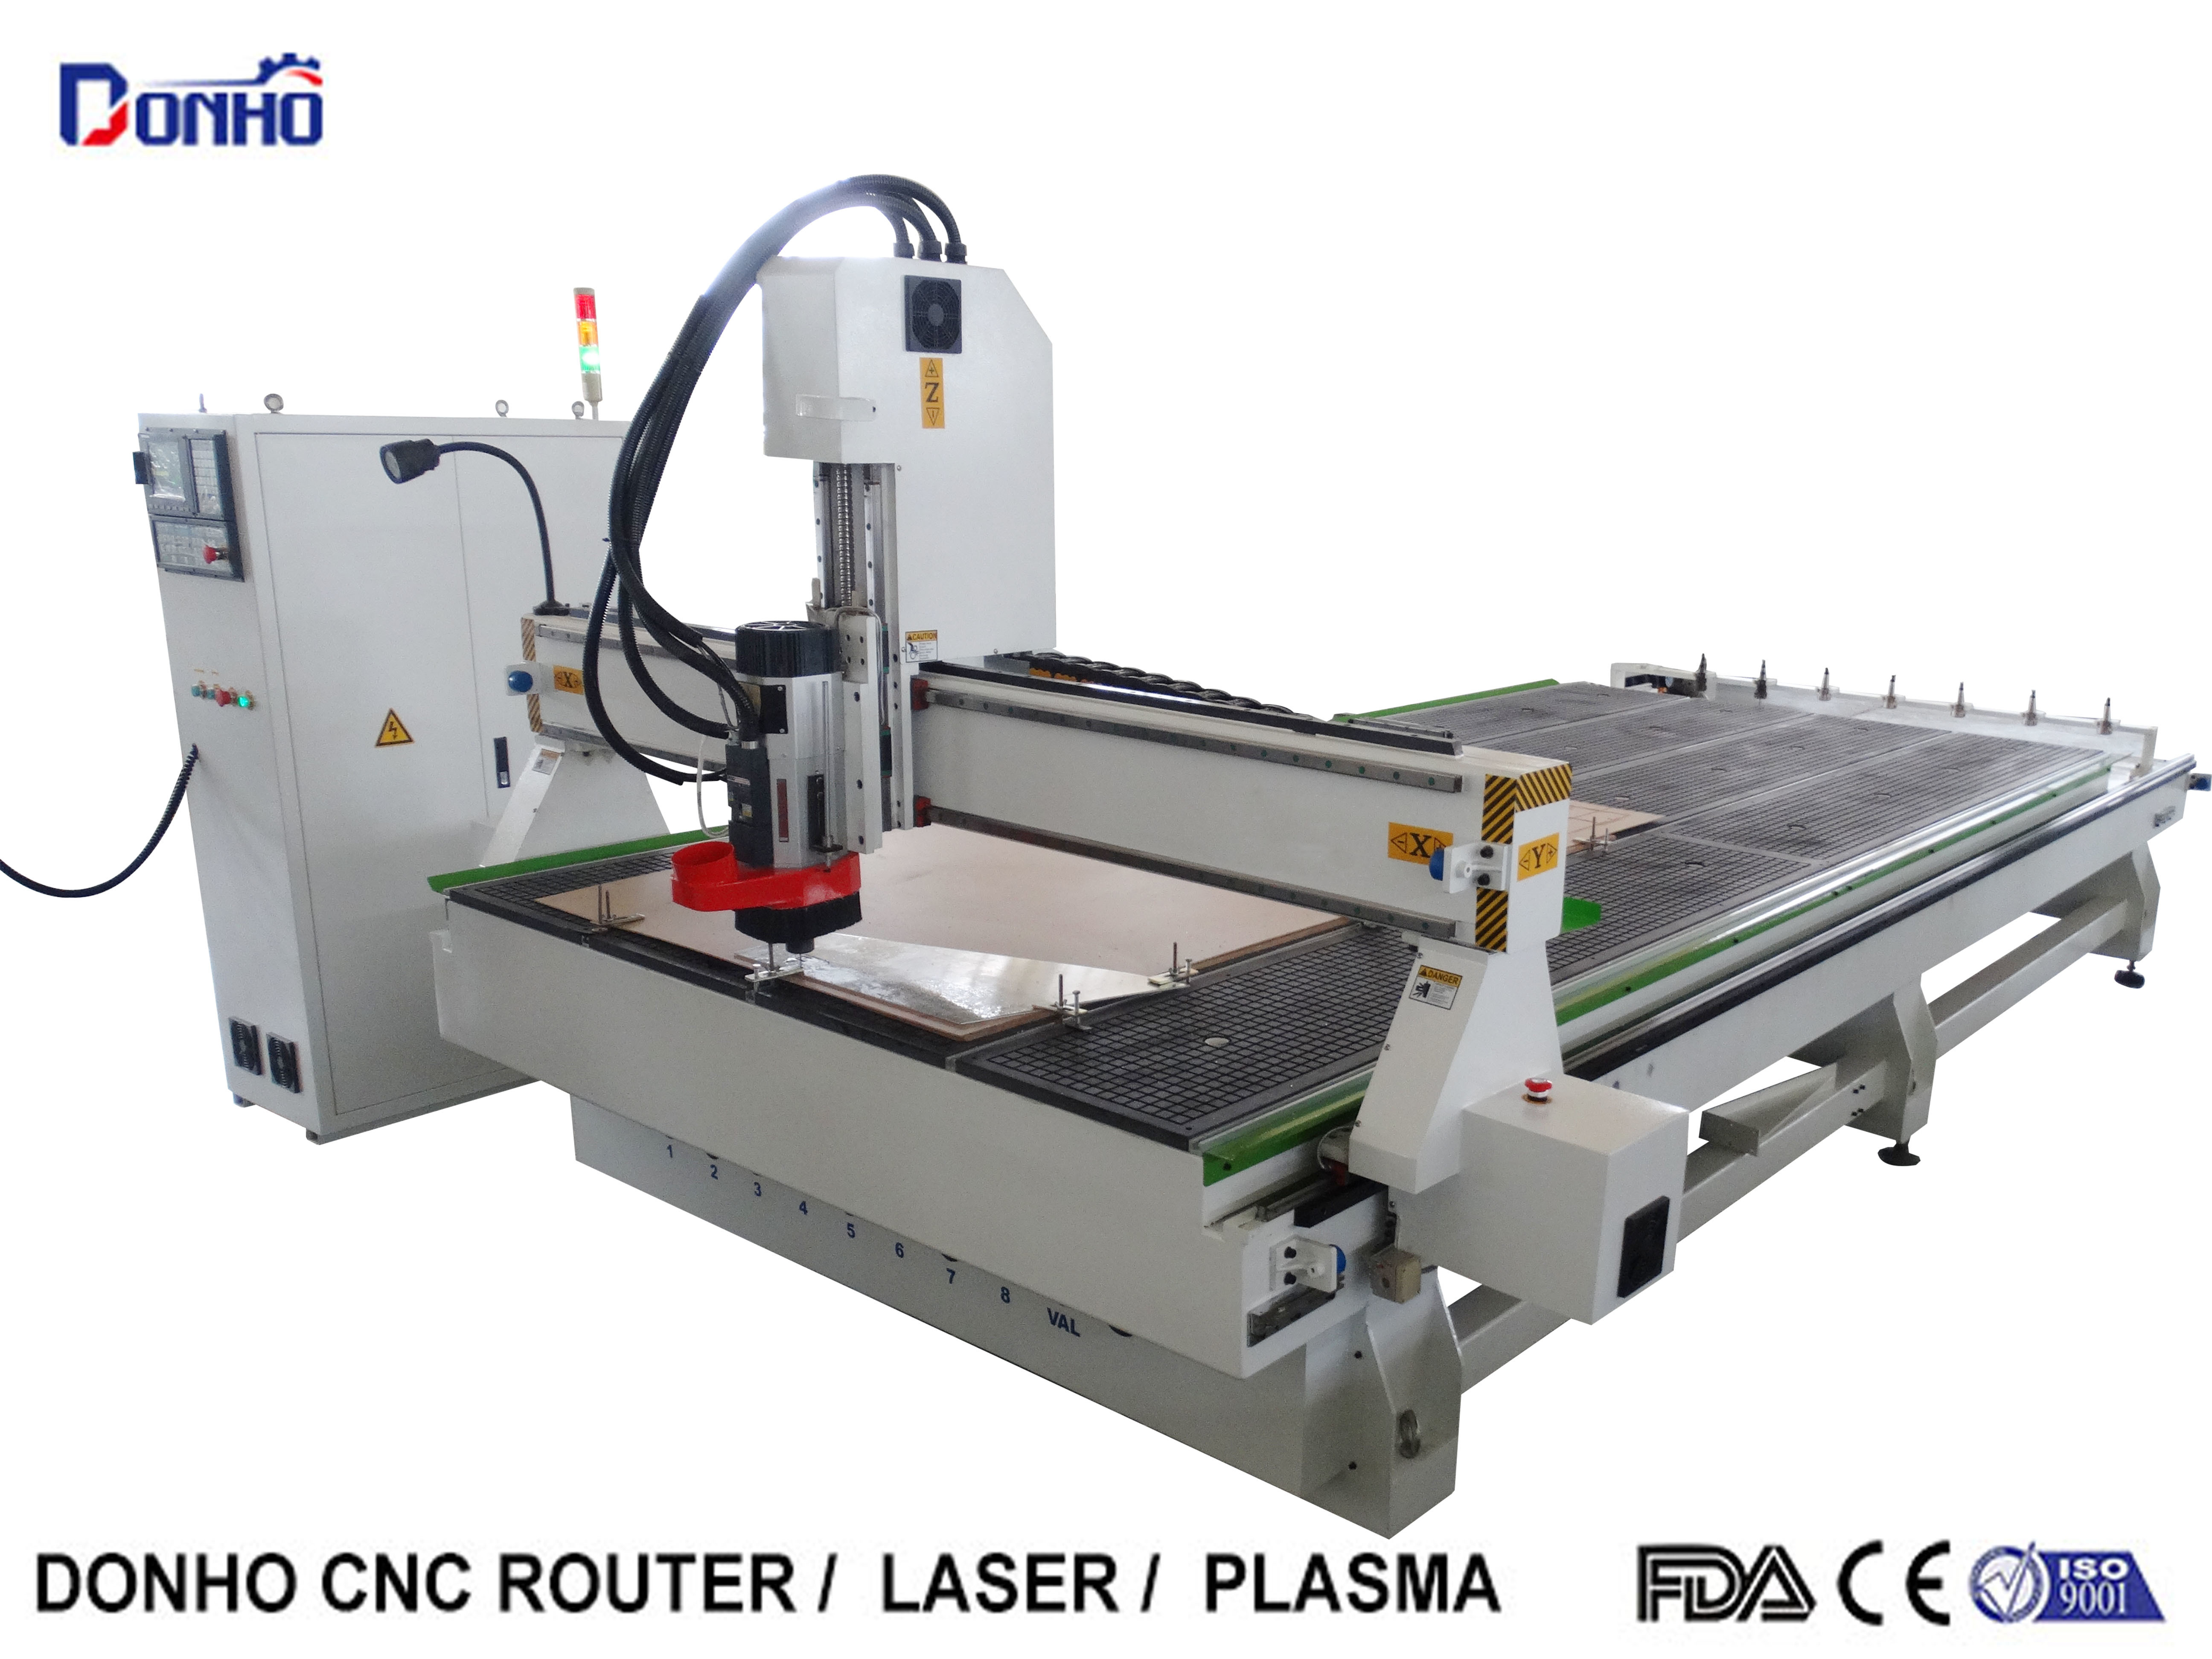  Computerized ATC CNC Router Machines For Fuiniture / Advertisement Industry Manufactures